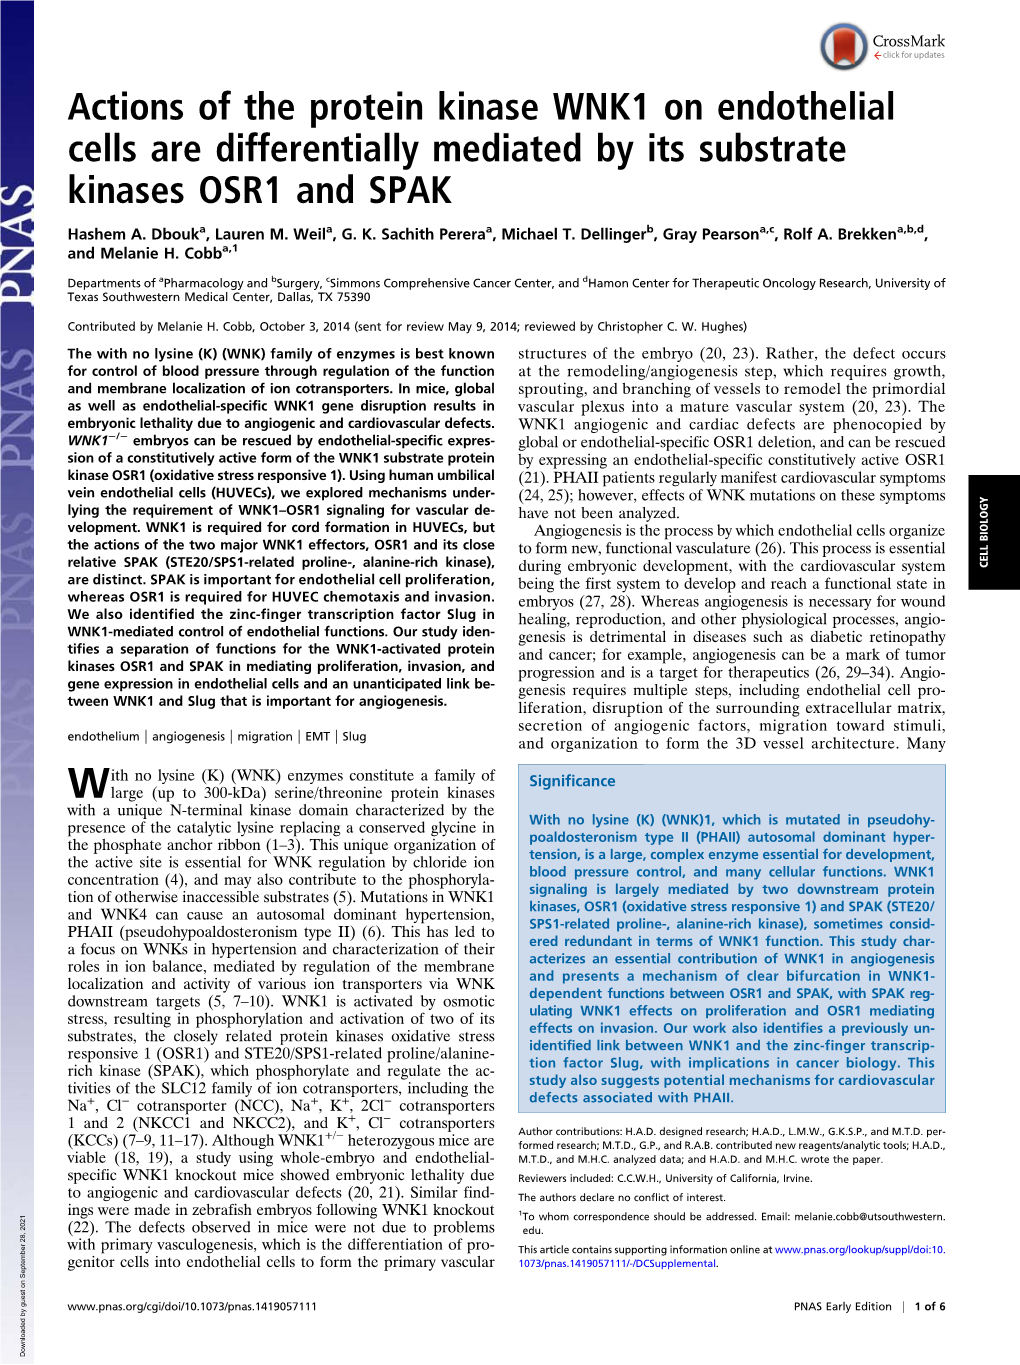 Actions of the Protein Kinase WNK1 on Endothelial Cells Are Differentially Mediated by Its Substrate Kinases OSR1 and SPAK